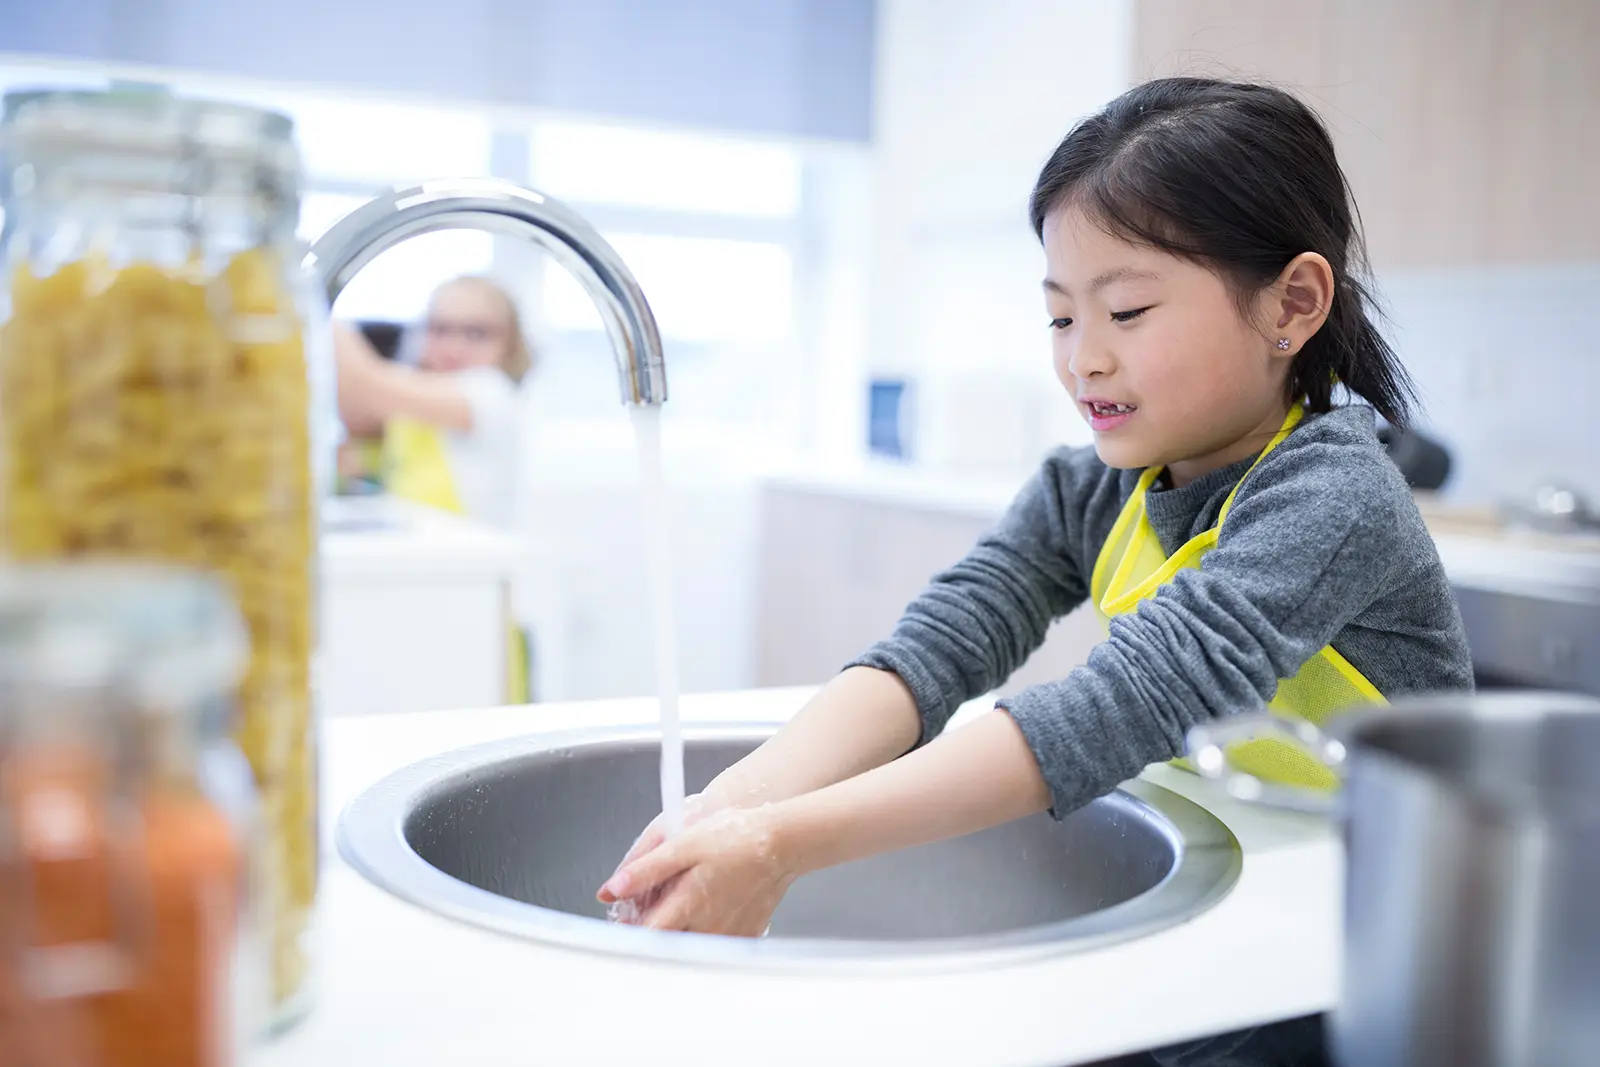 Child in apron washes hands at classroom sink